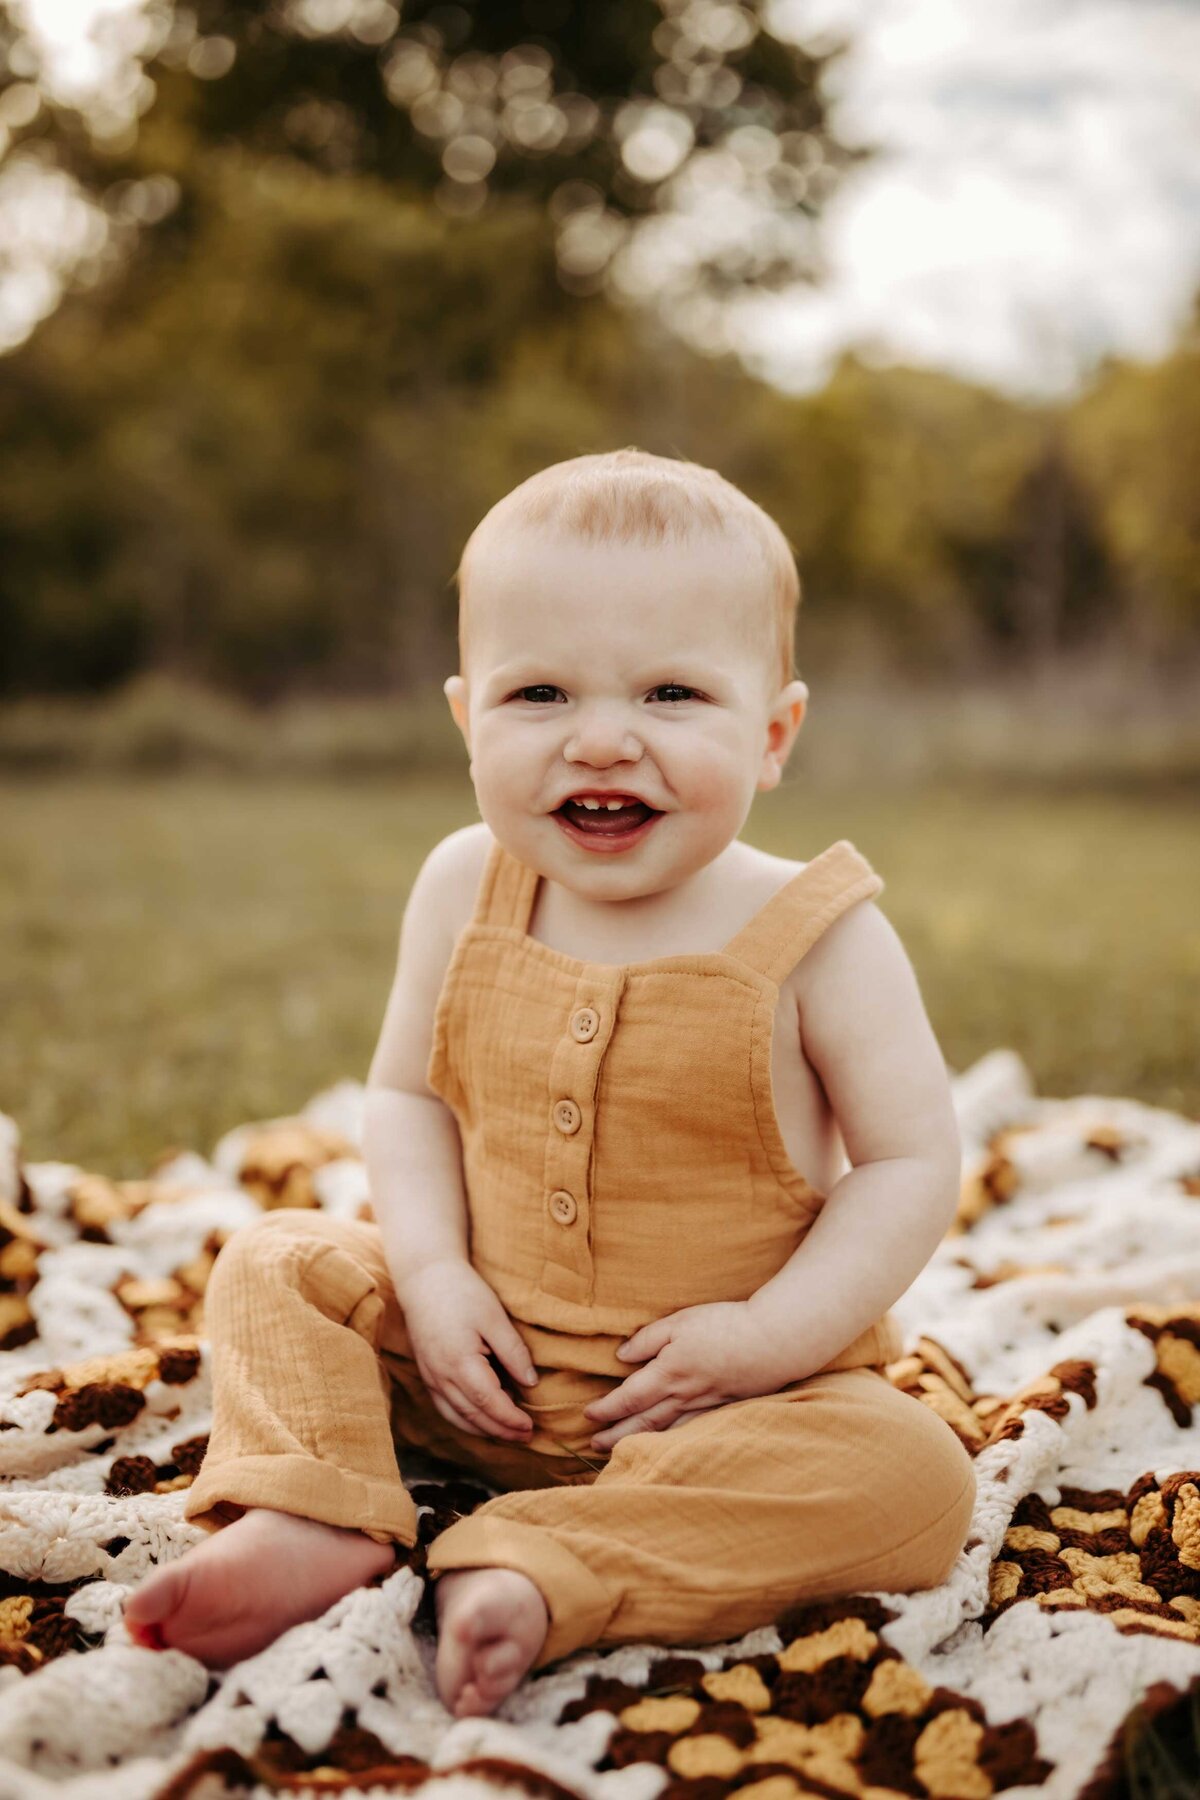 young boy sitting on a macrame blanket smiling. He is wearing yellow overalls